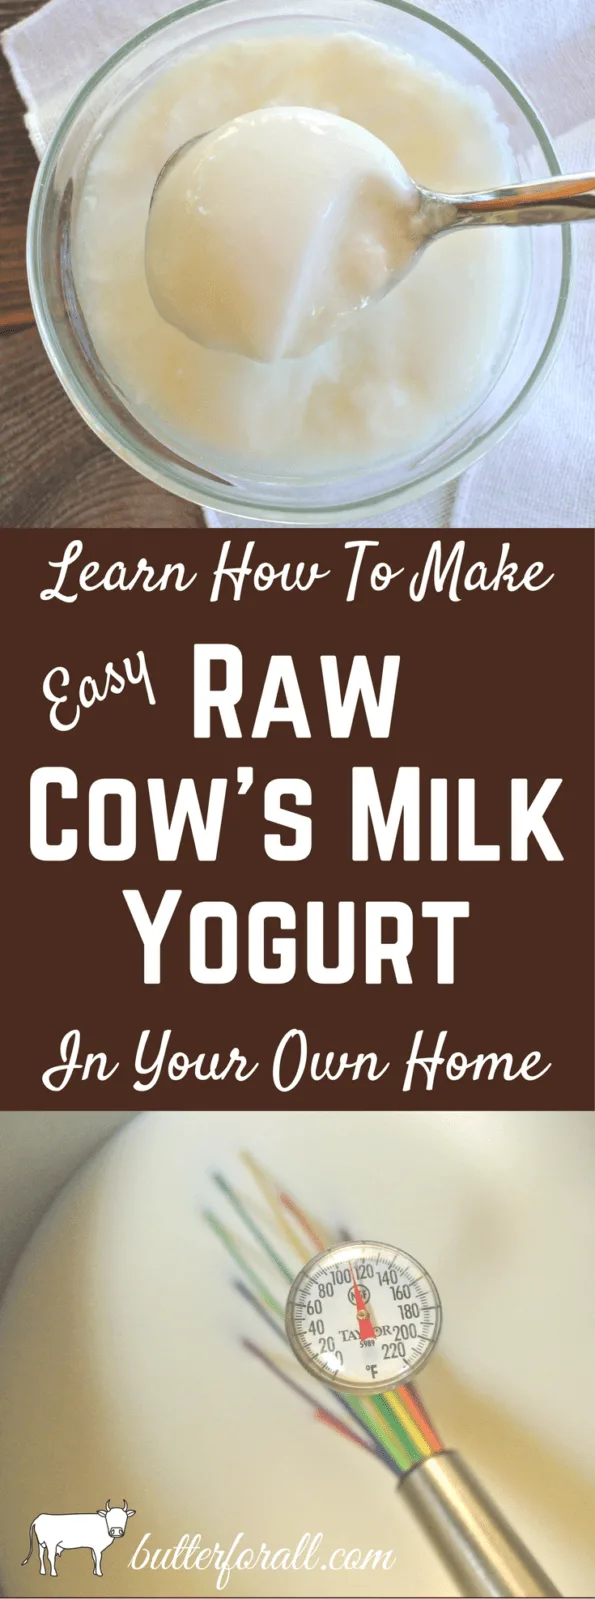 Collage of raw cow's milk yogurt and text overlay.